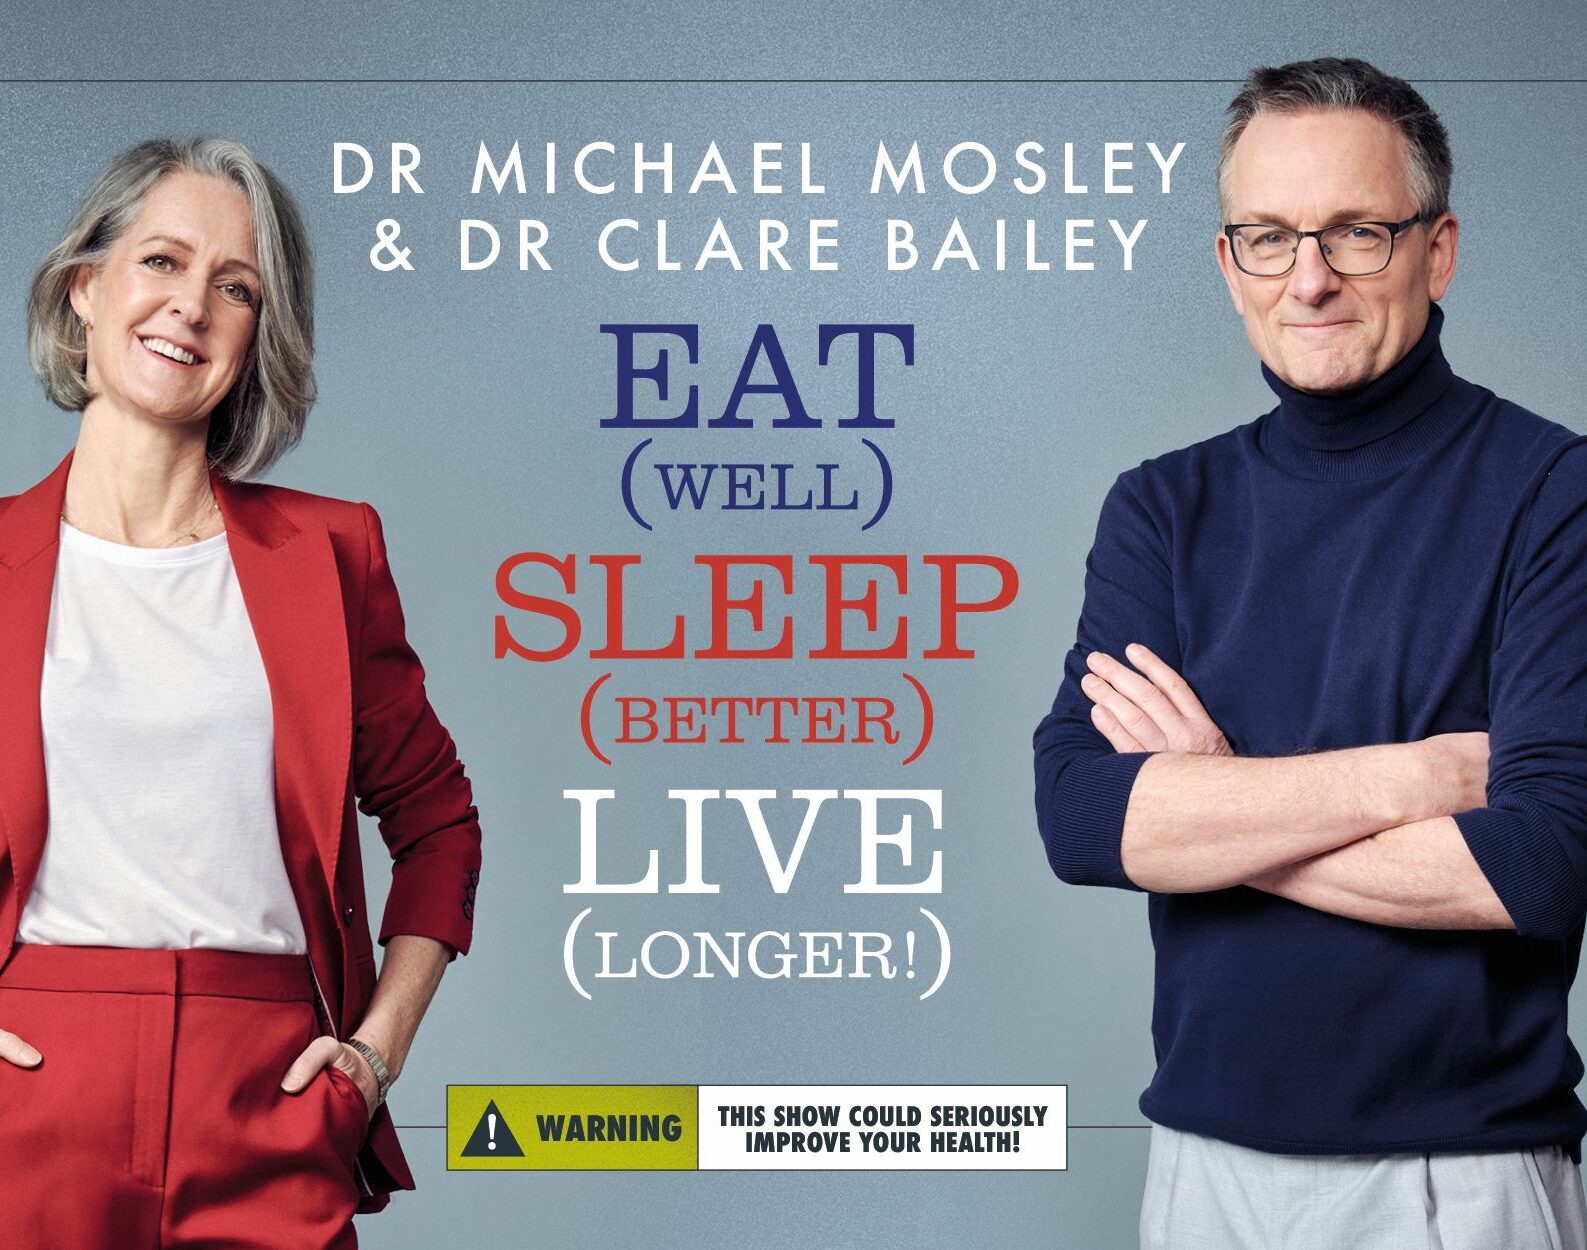 Dr Michael Mosley and Dr Clare Bailey – Eat (well), Sleep (better), Live (longer)!